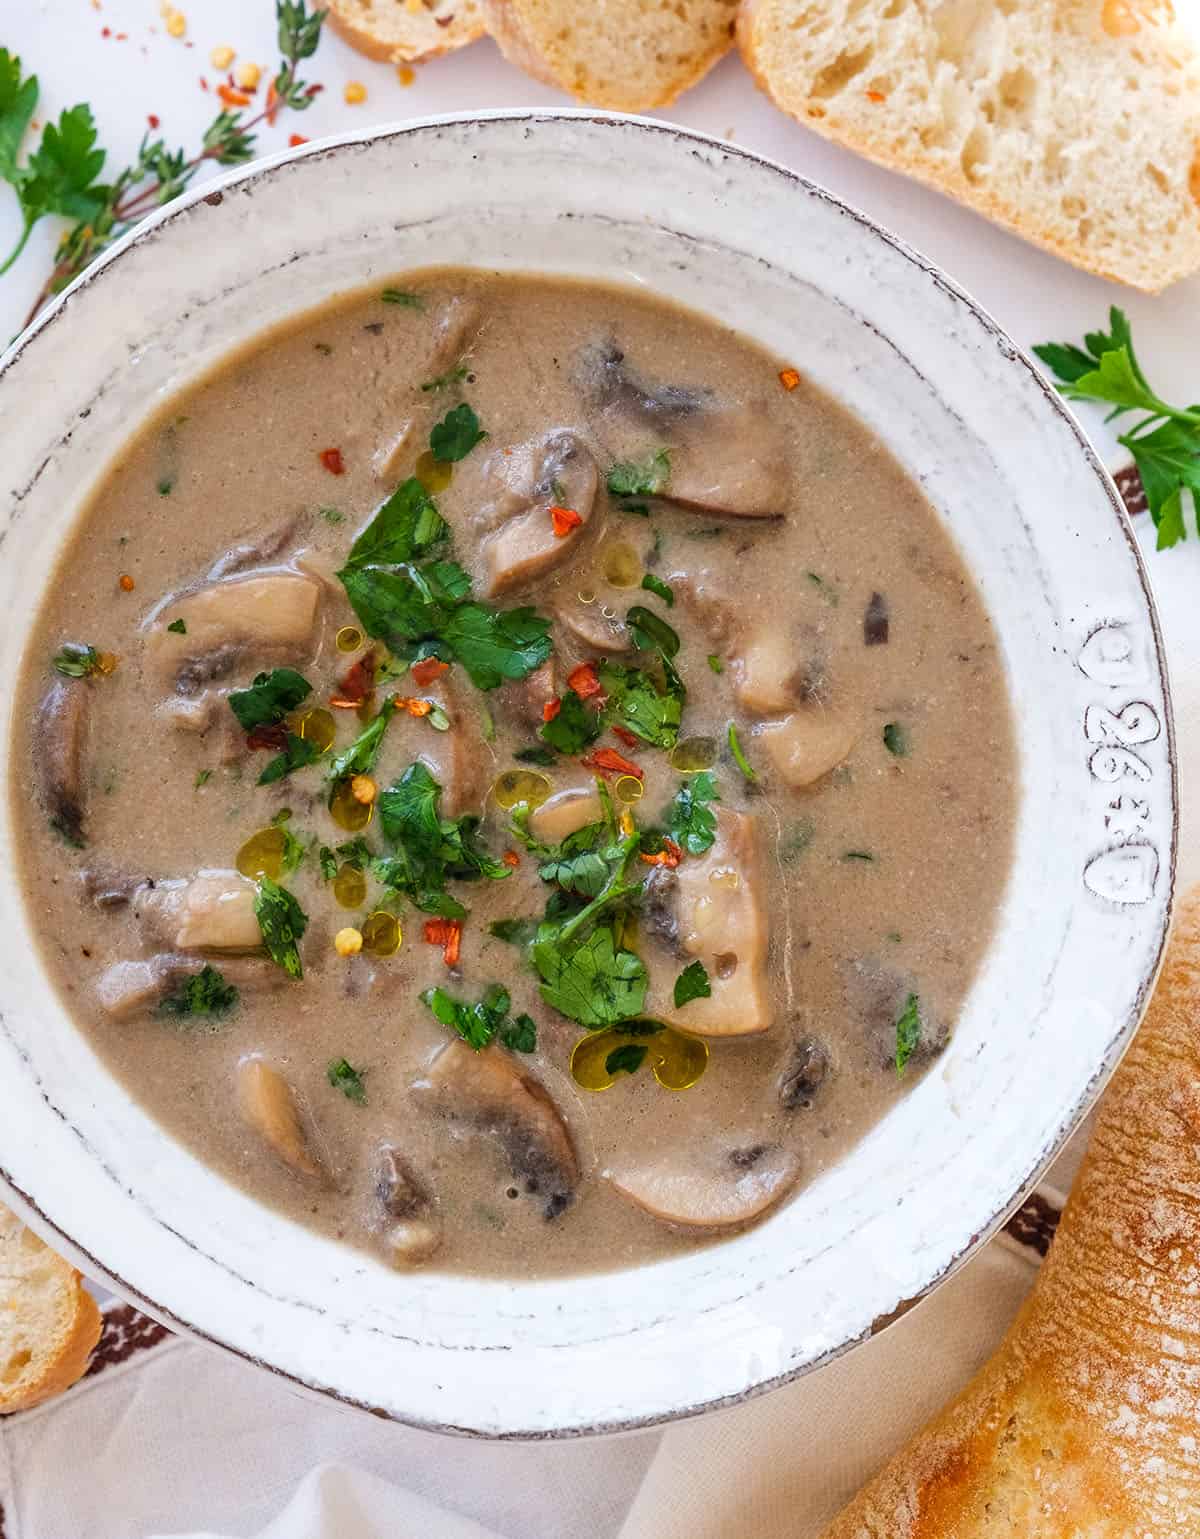 Top view of a white bowl full of creamy vegan mushroom soup garnished with parsley.